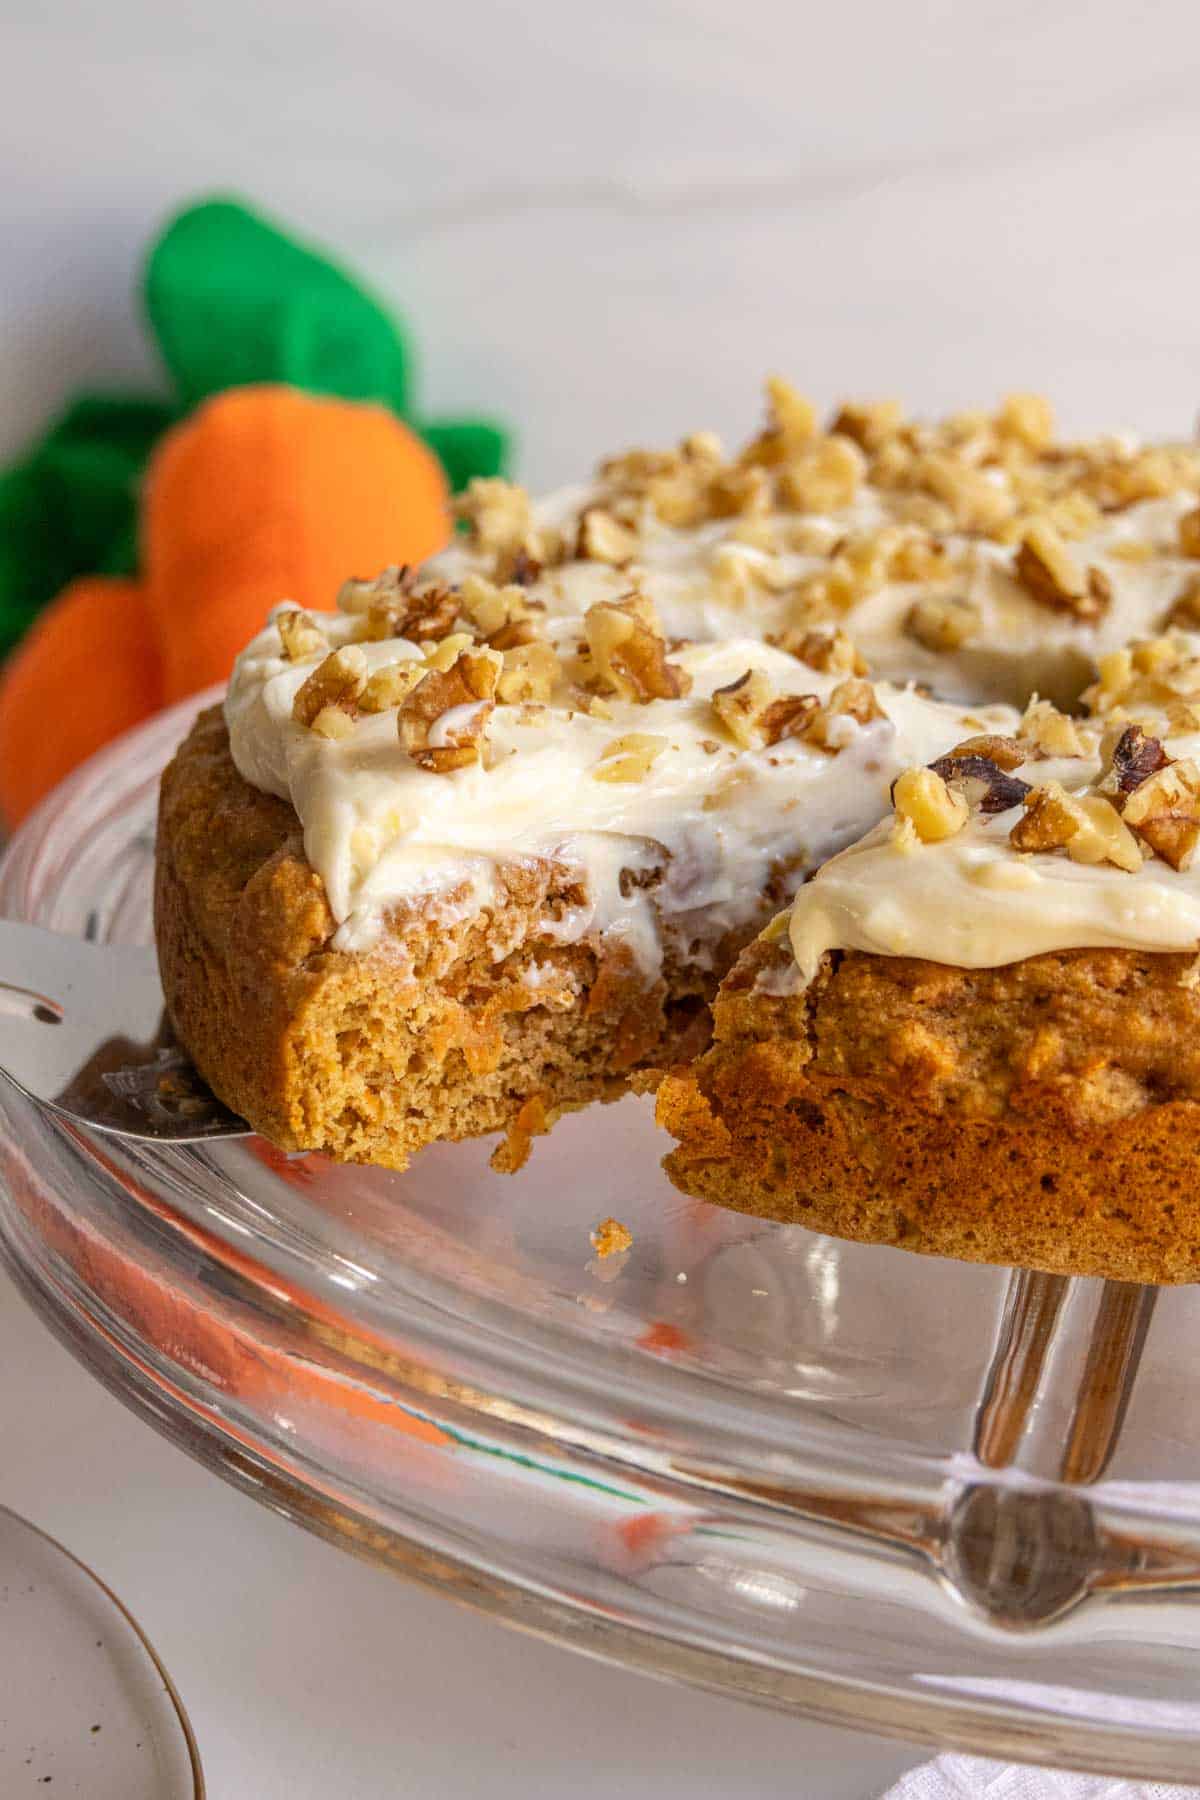 A carrot cake with cream cheese frosting and chopped nuts on a glass stand, with a few whole carrots in the background.